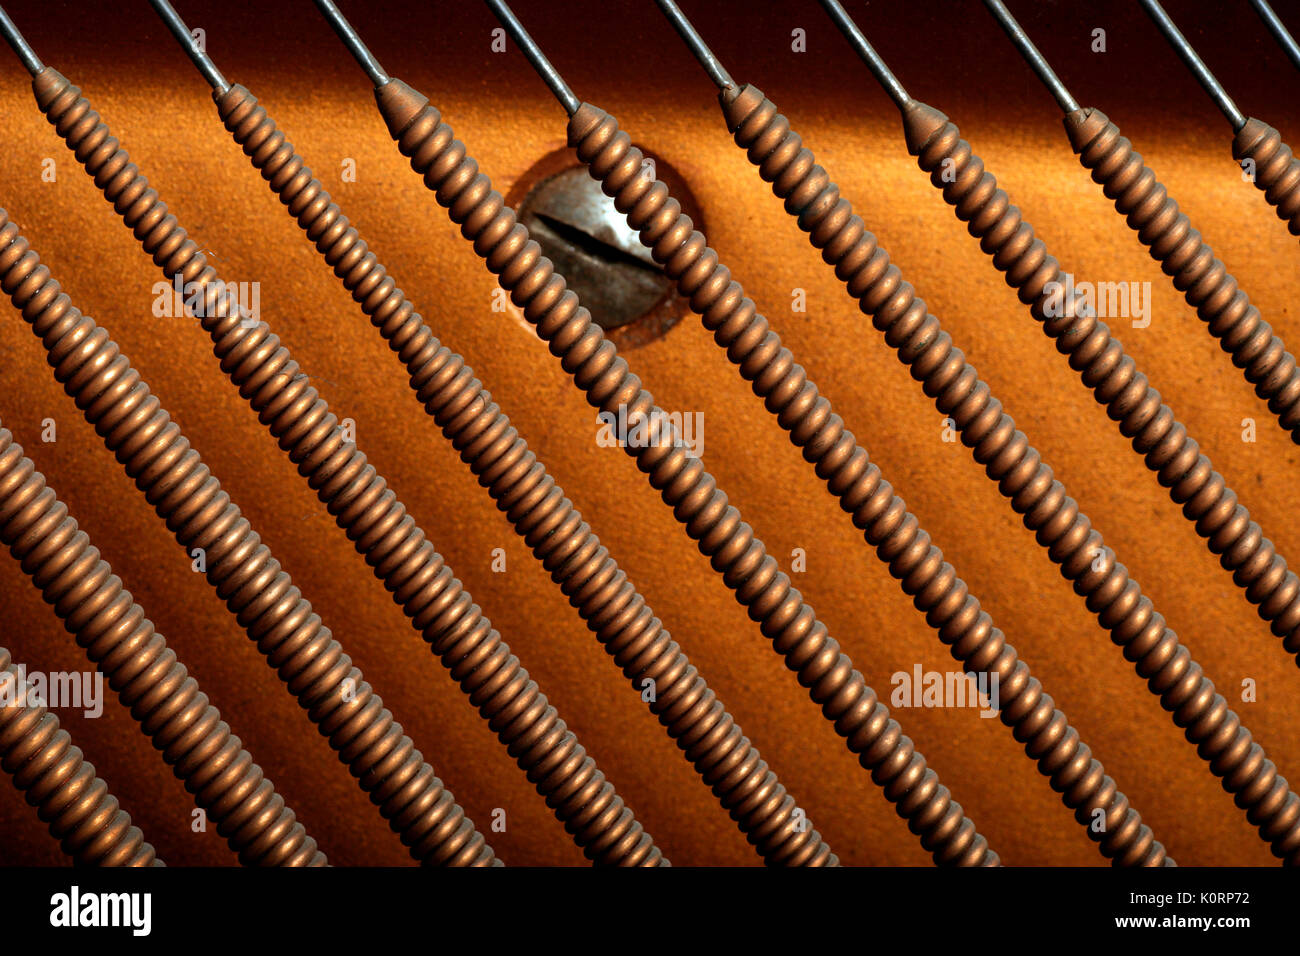 Bass strings from an upright piano - Close-up detail Stock Photo